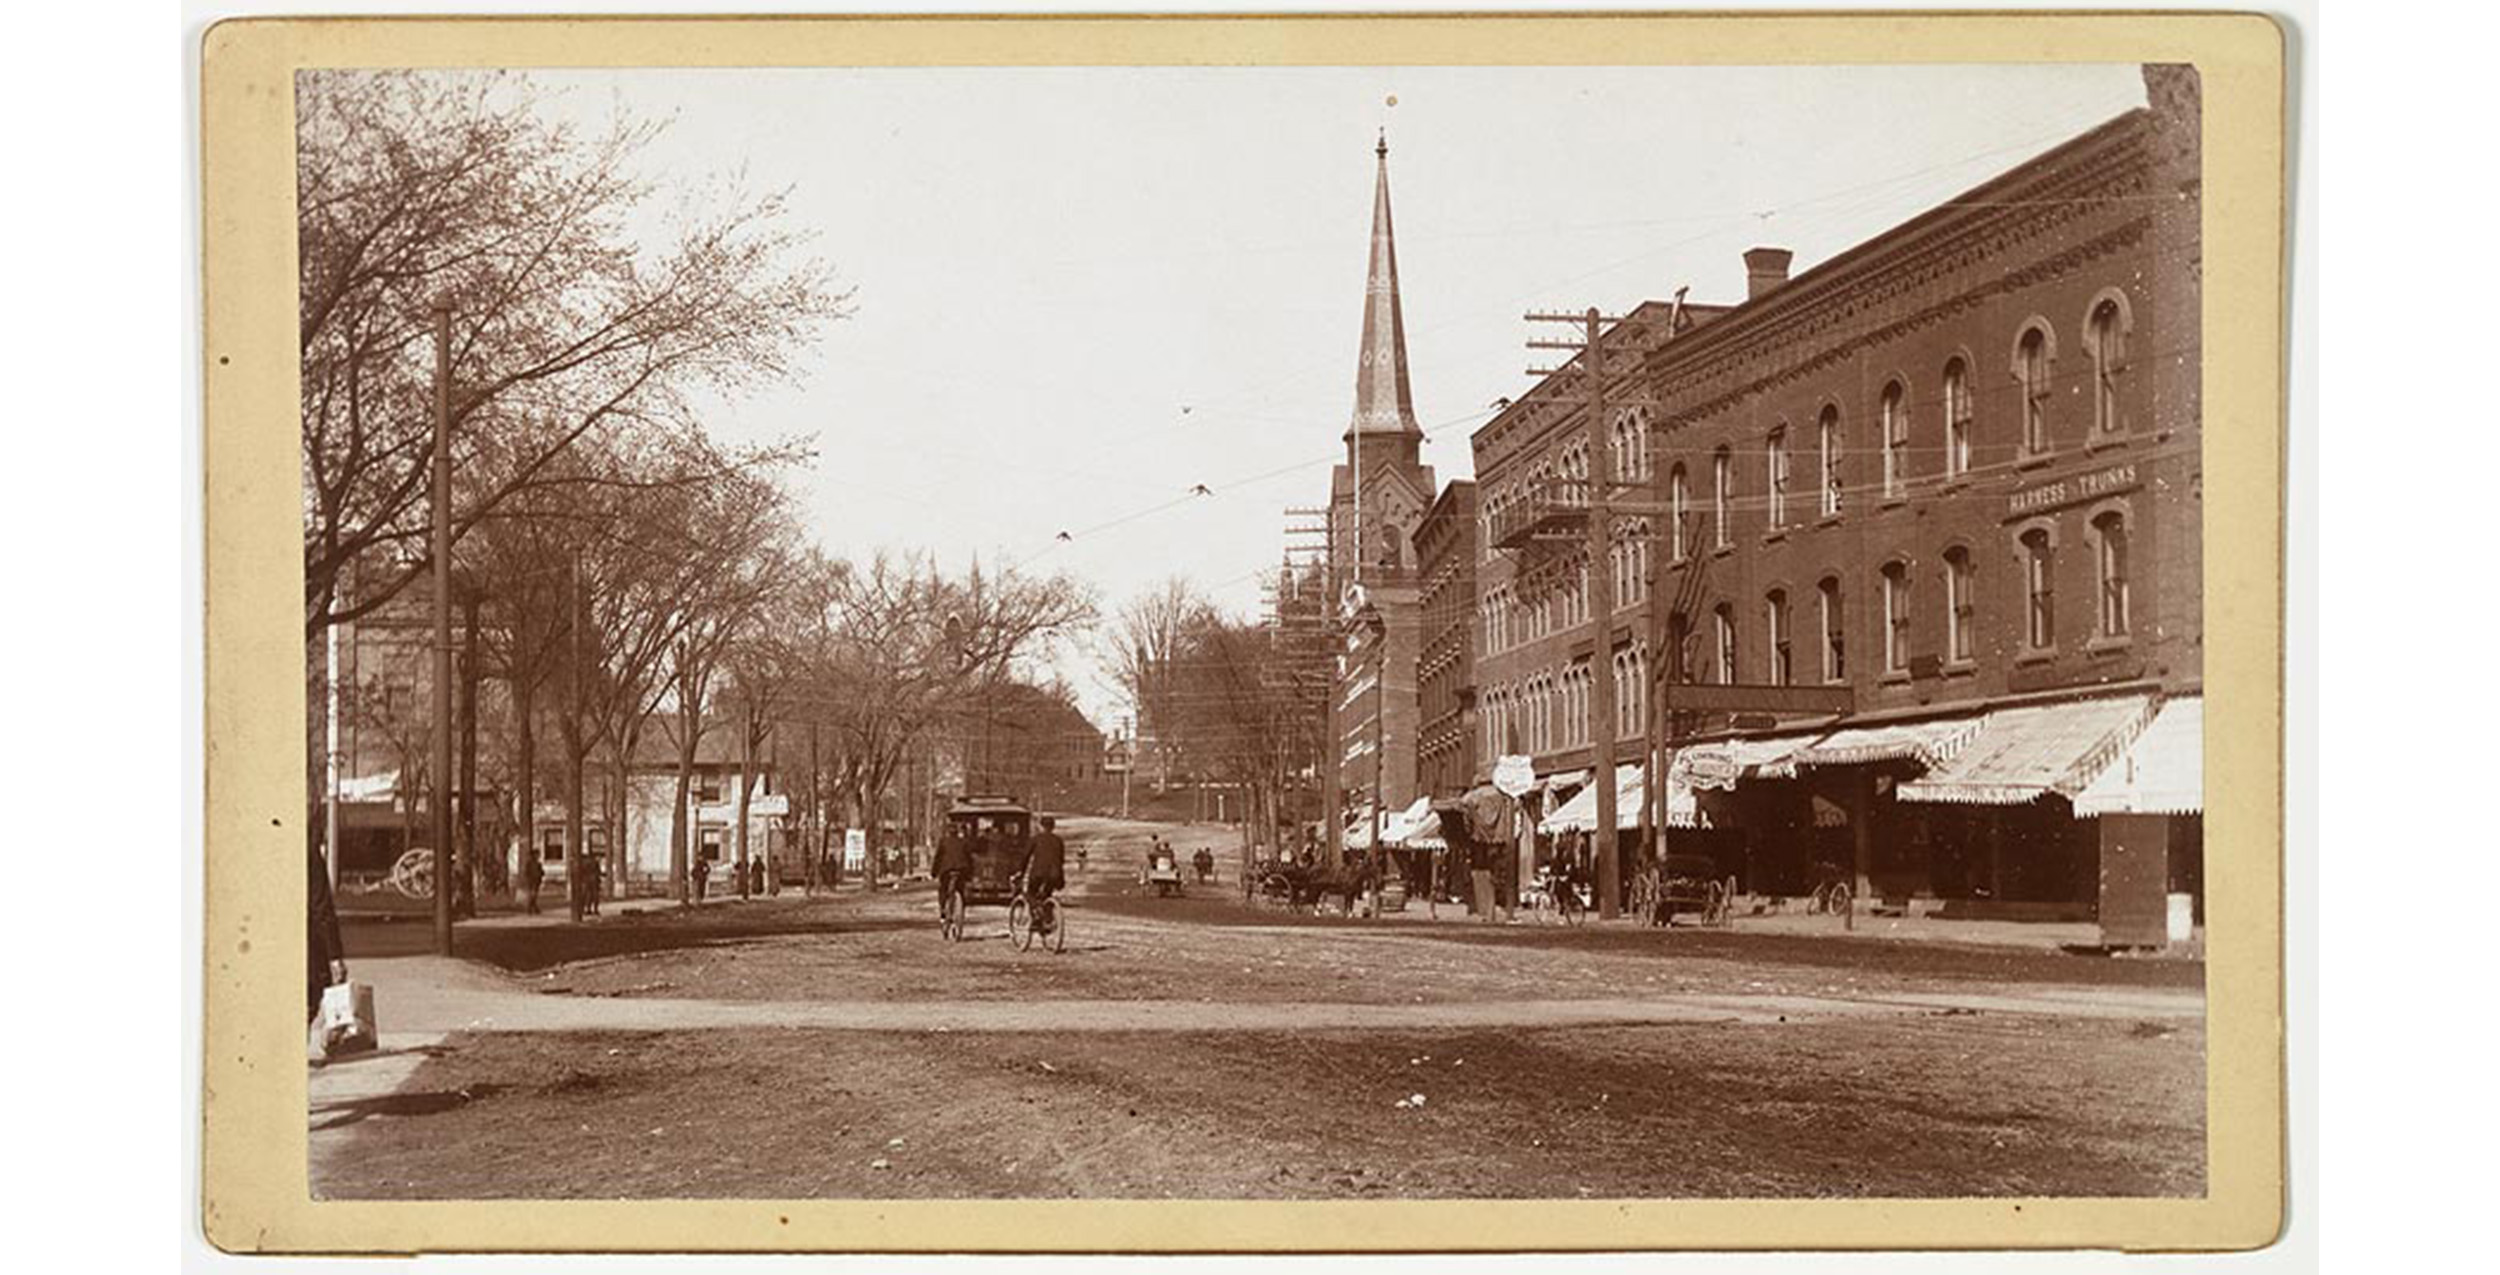 exterior, main street with dirt street, horse drawn carriages and bicyclists on street, brick city block on right with HARNESS TRUNKS sign, awnings covering sidewalk, trees lining street on left, people on sidewalk, telephone poles and wires lining streets, distant view of parts of Smith College buildings